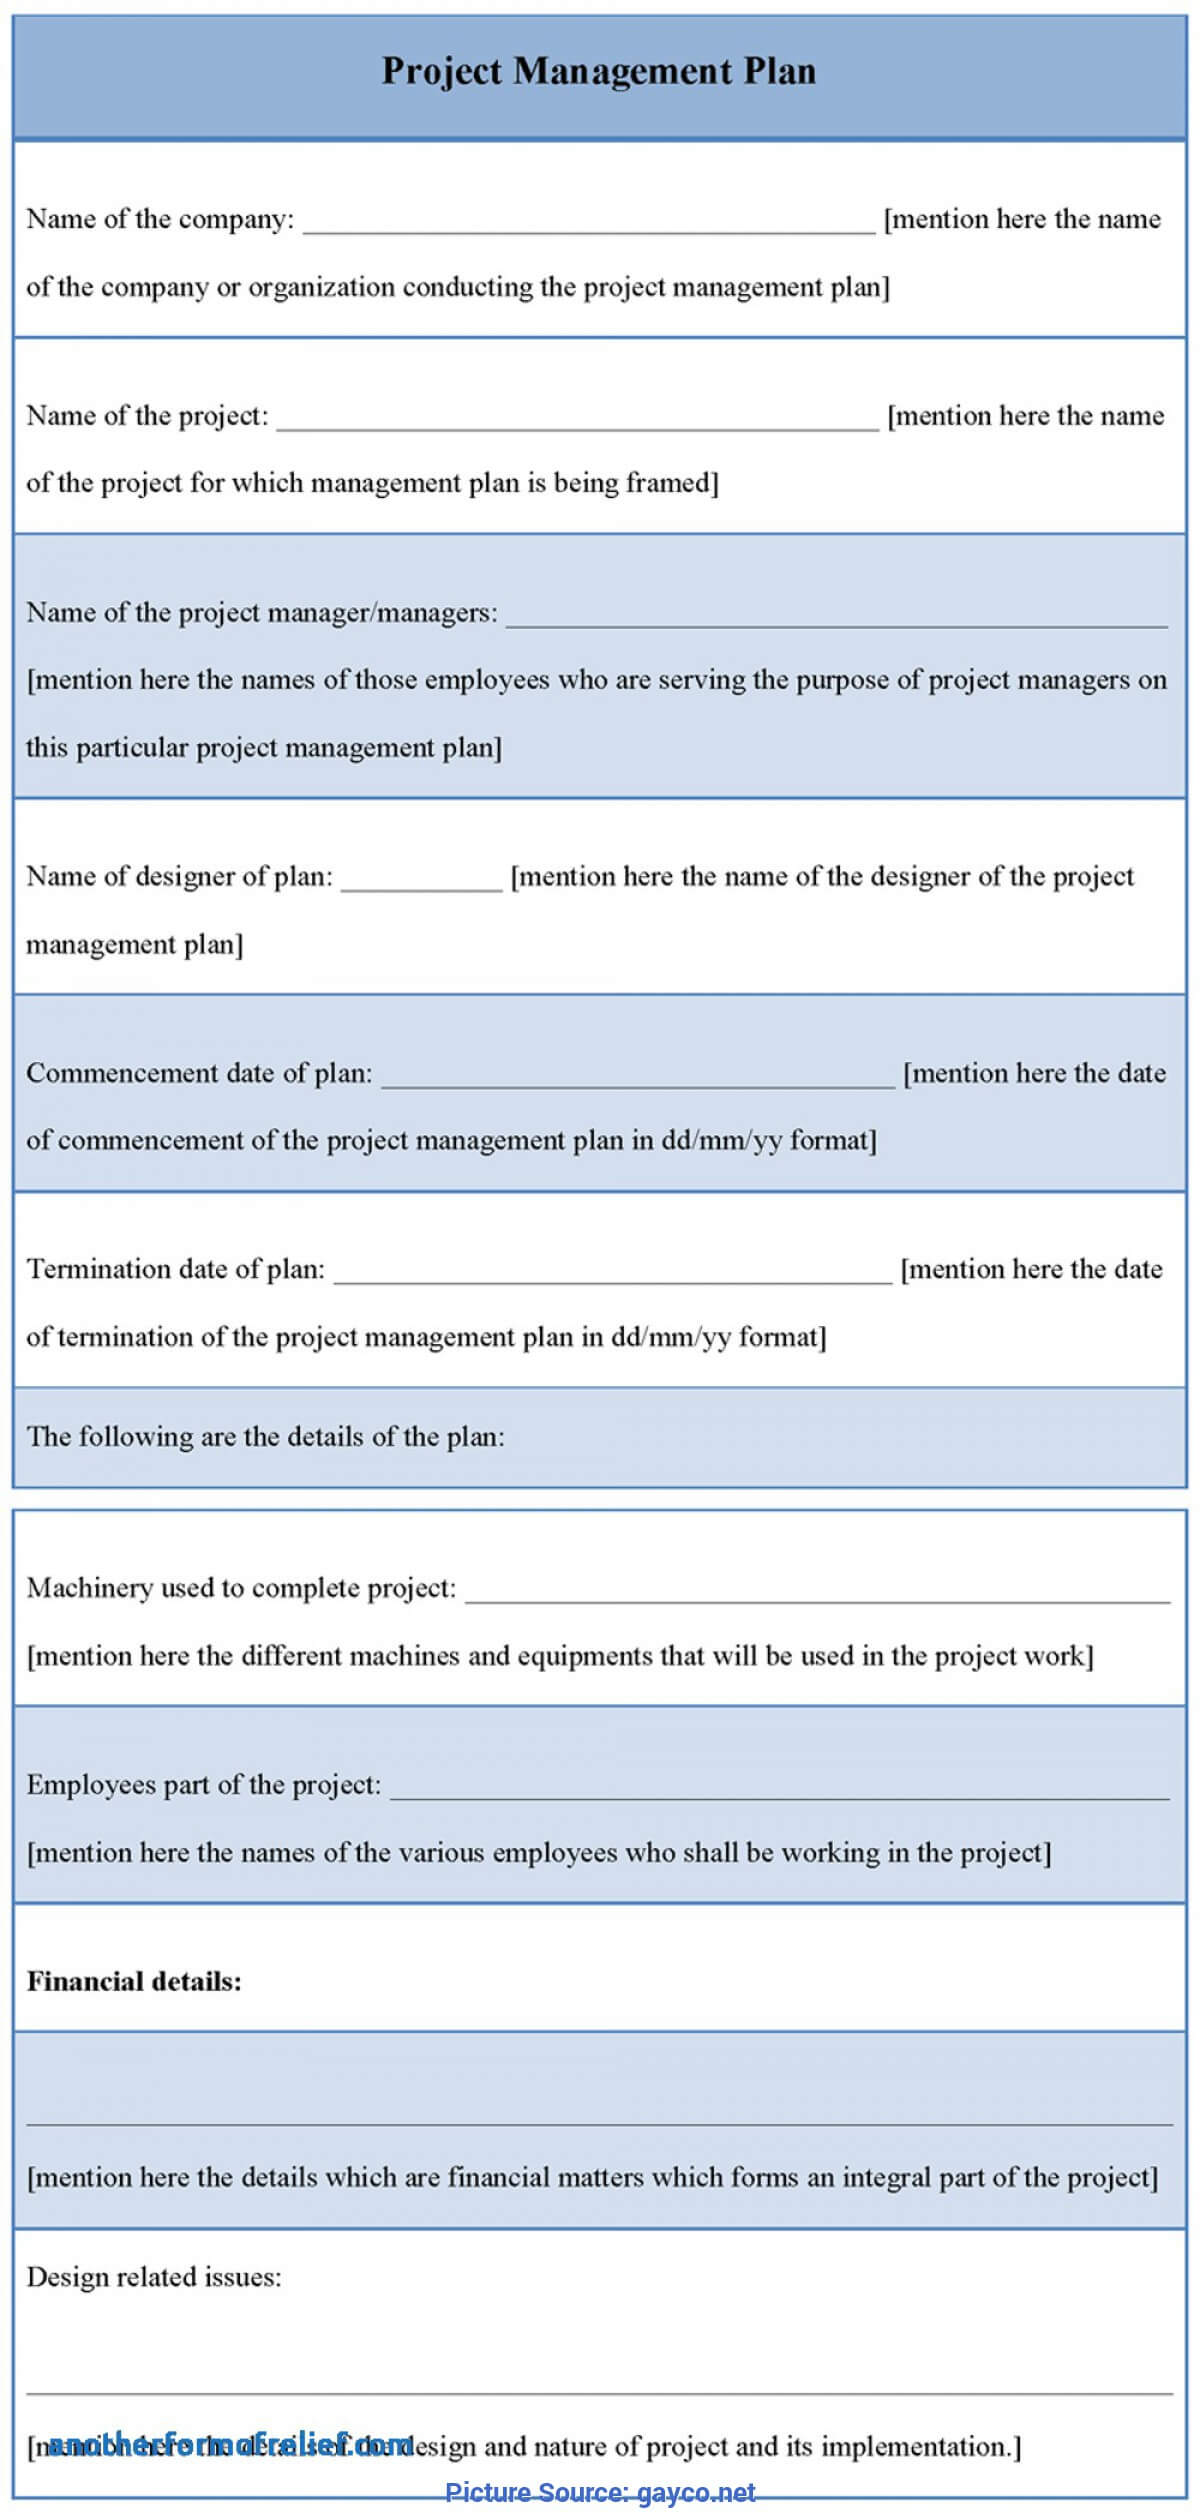 lessons learned project management template